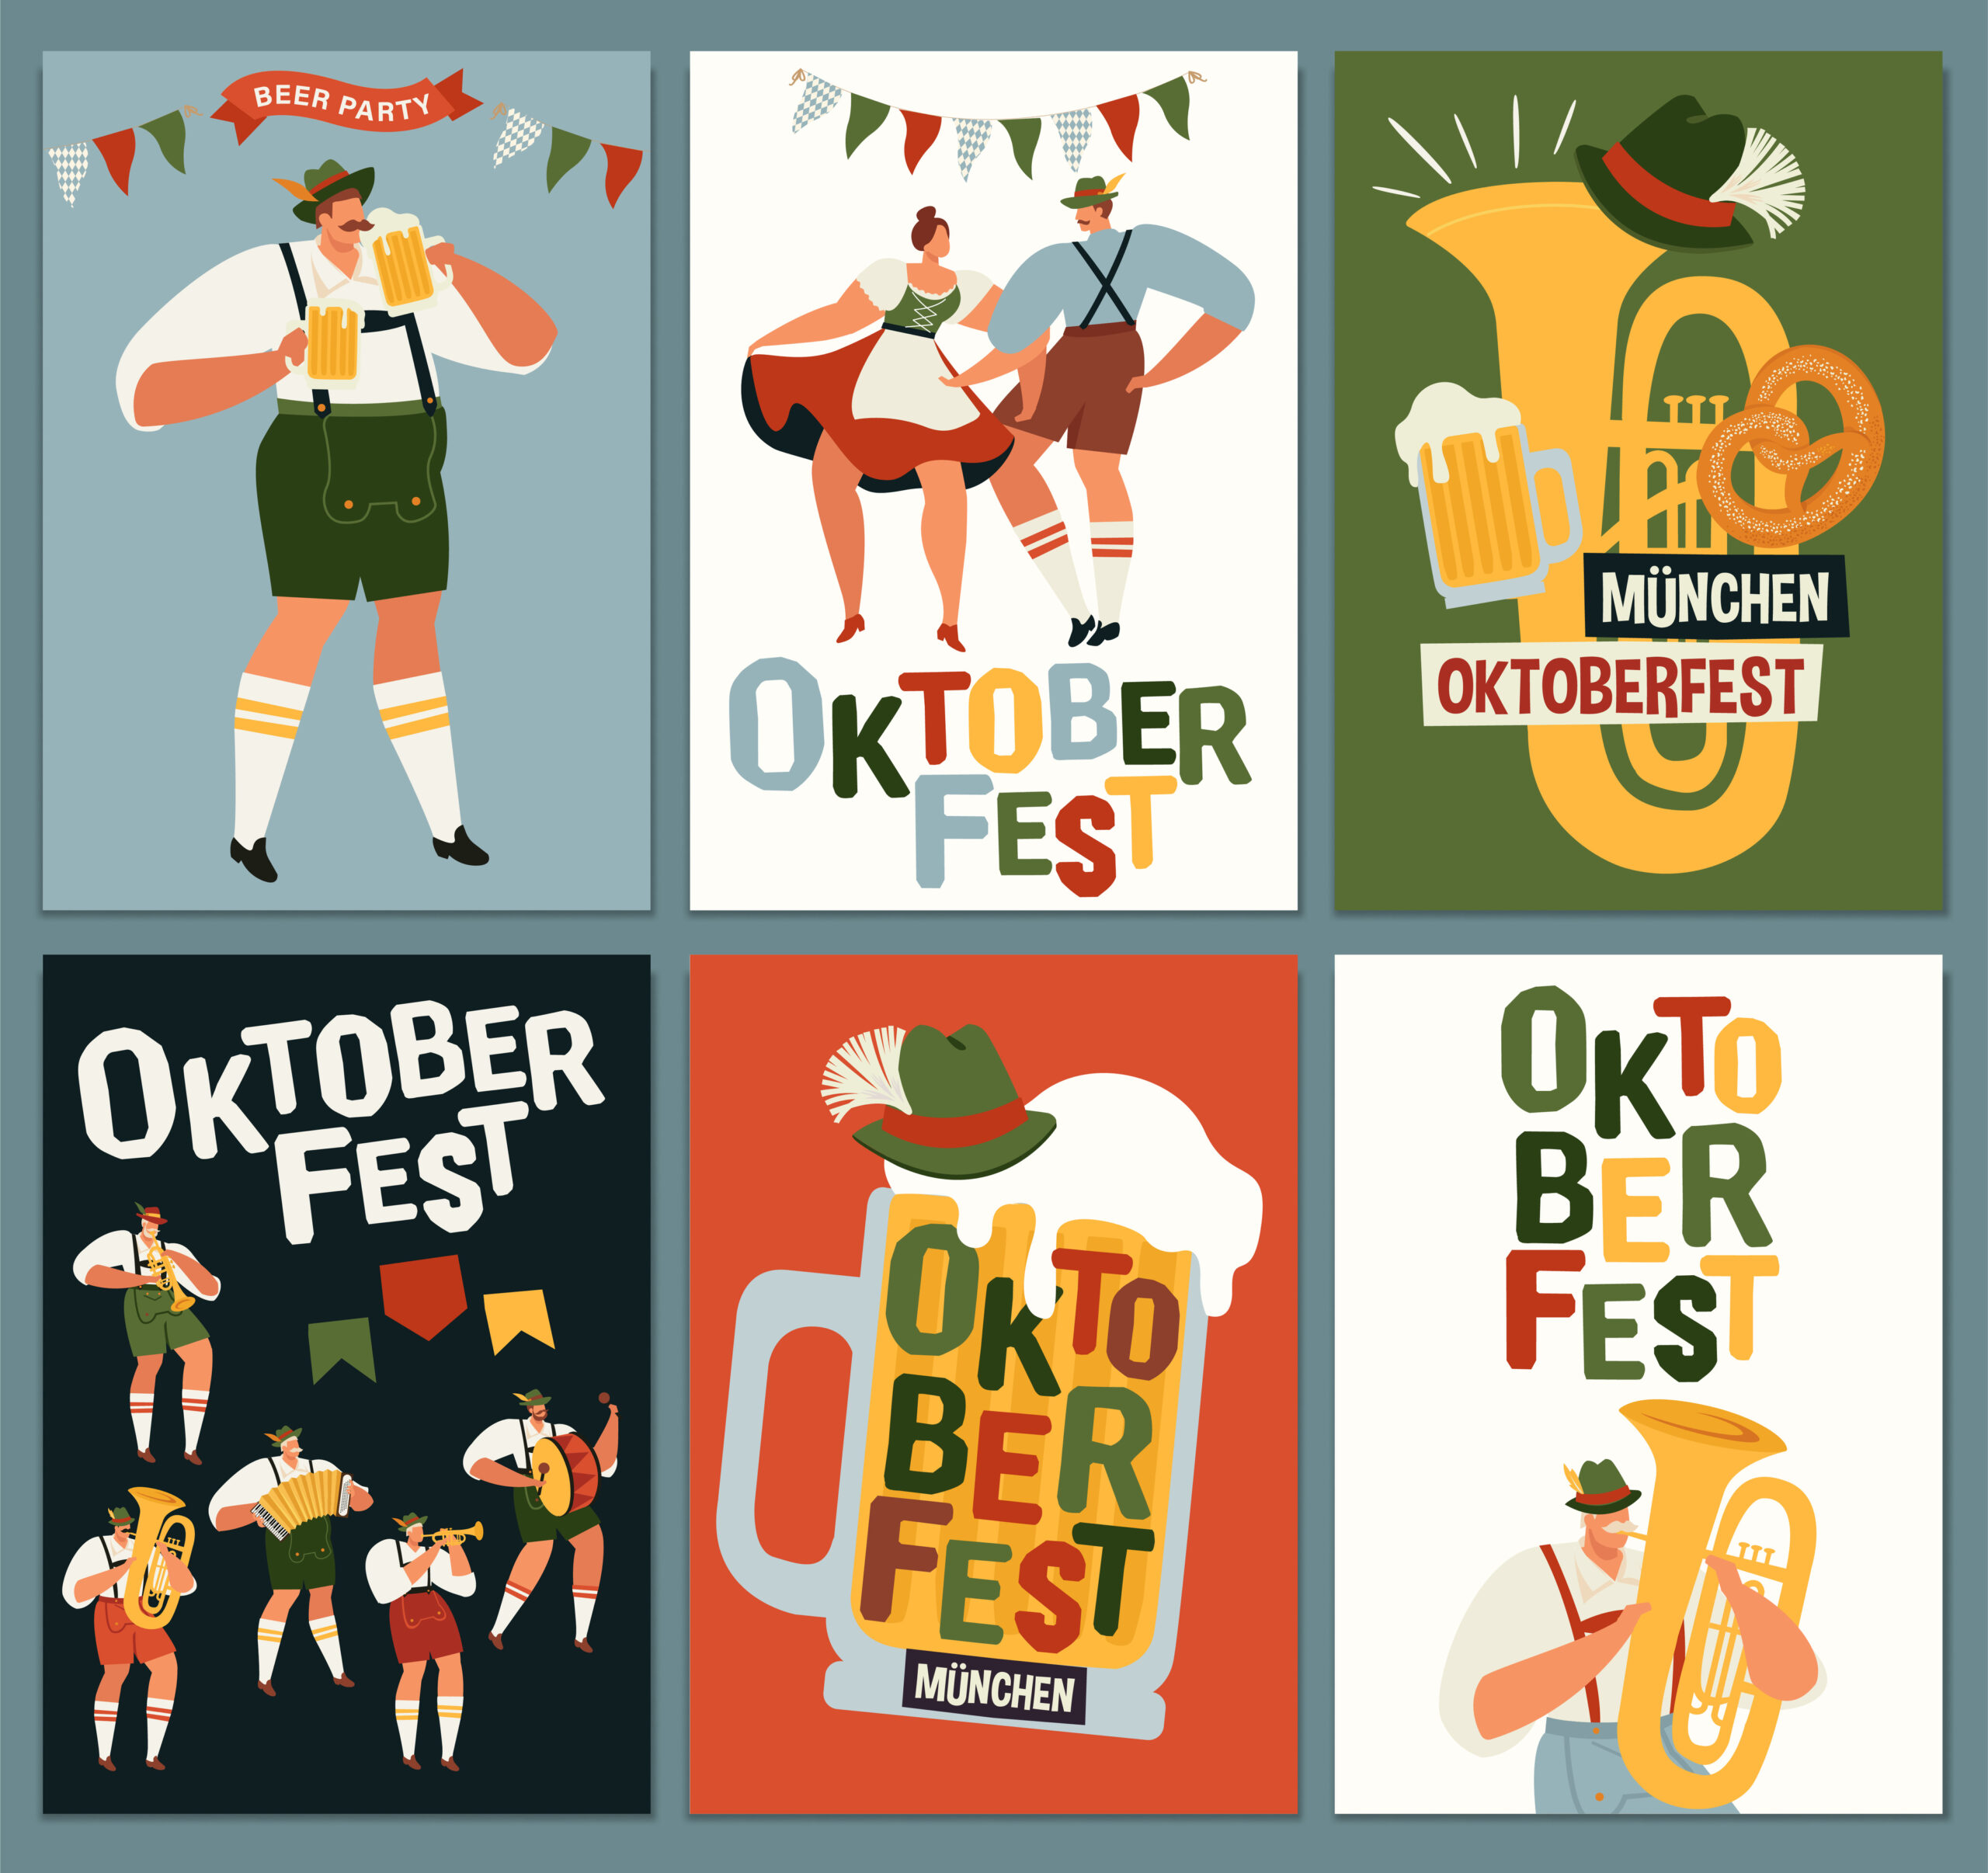 Graphic of six Oktoberfest scenes, including a man in lederhosen, a beer, a tub holding a beer and people dancing